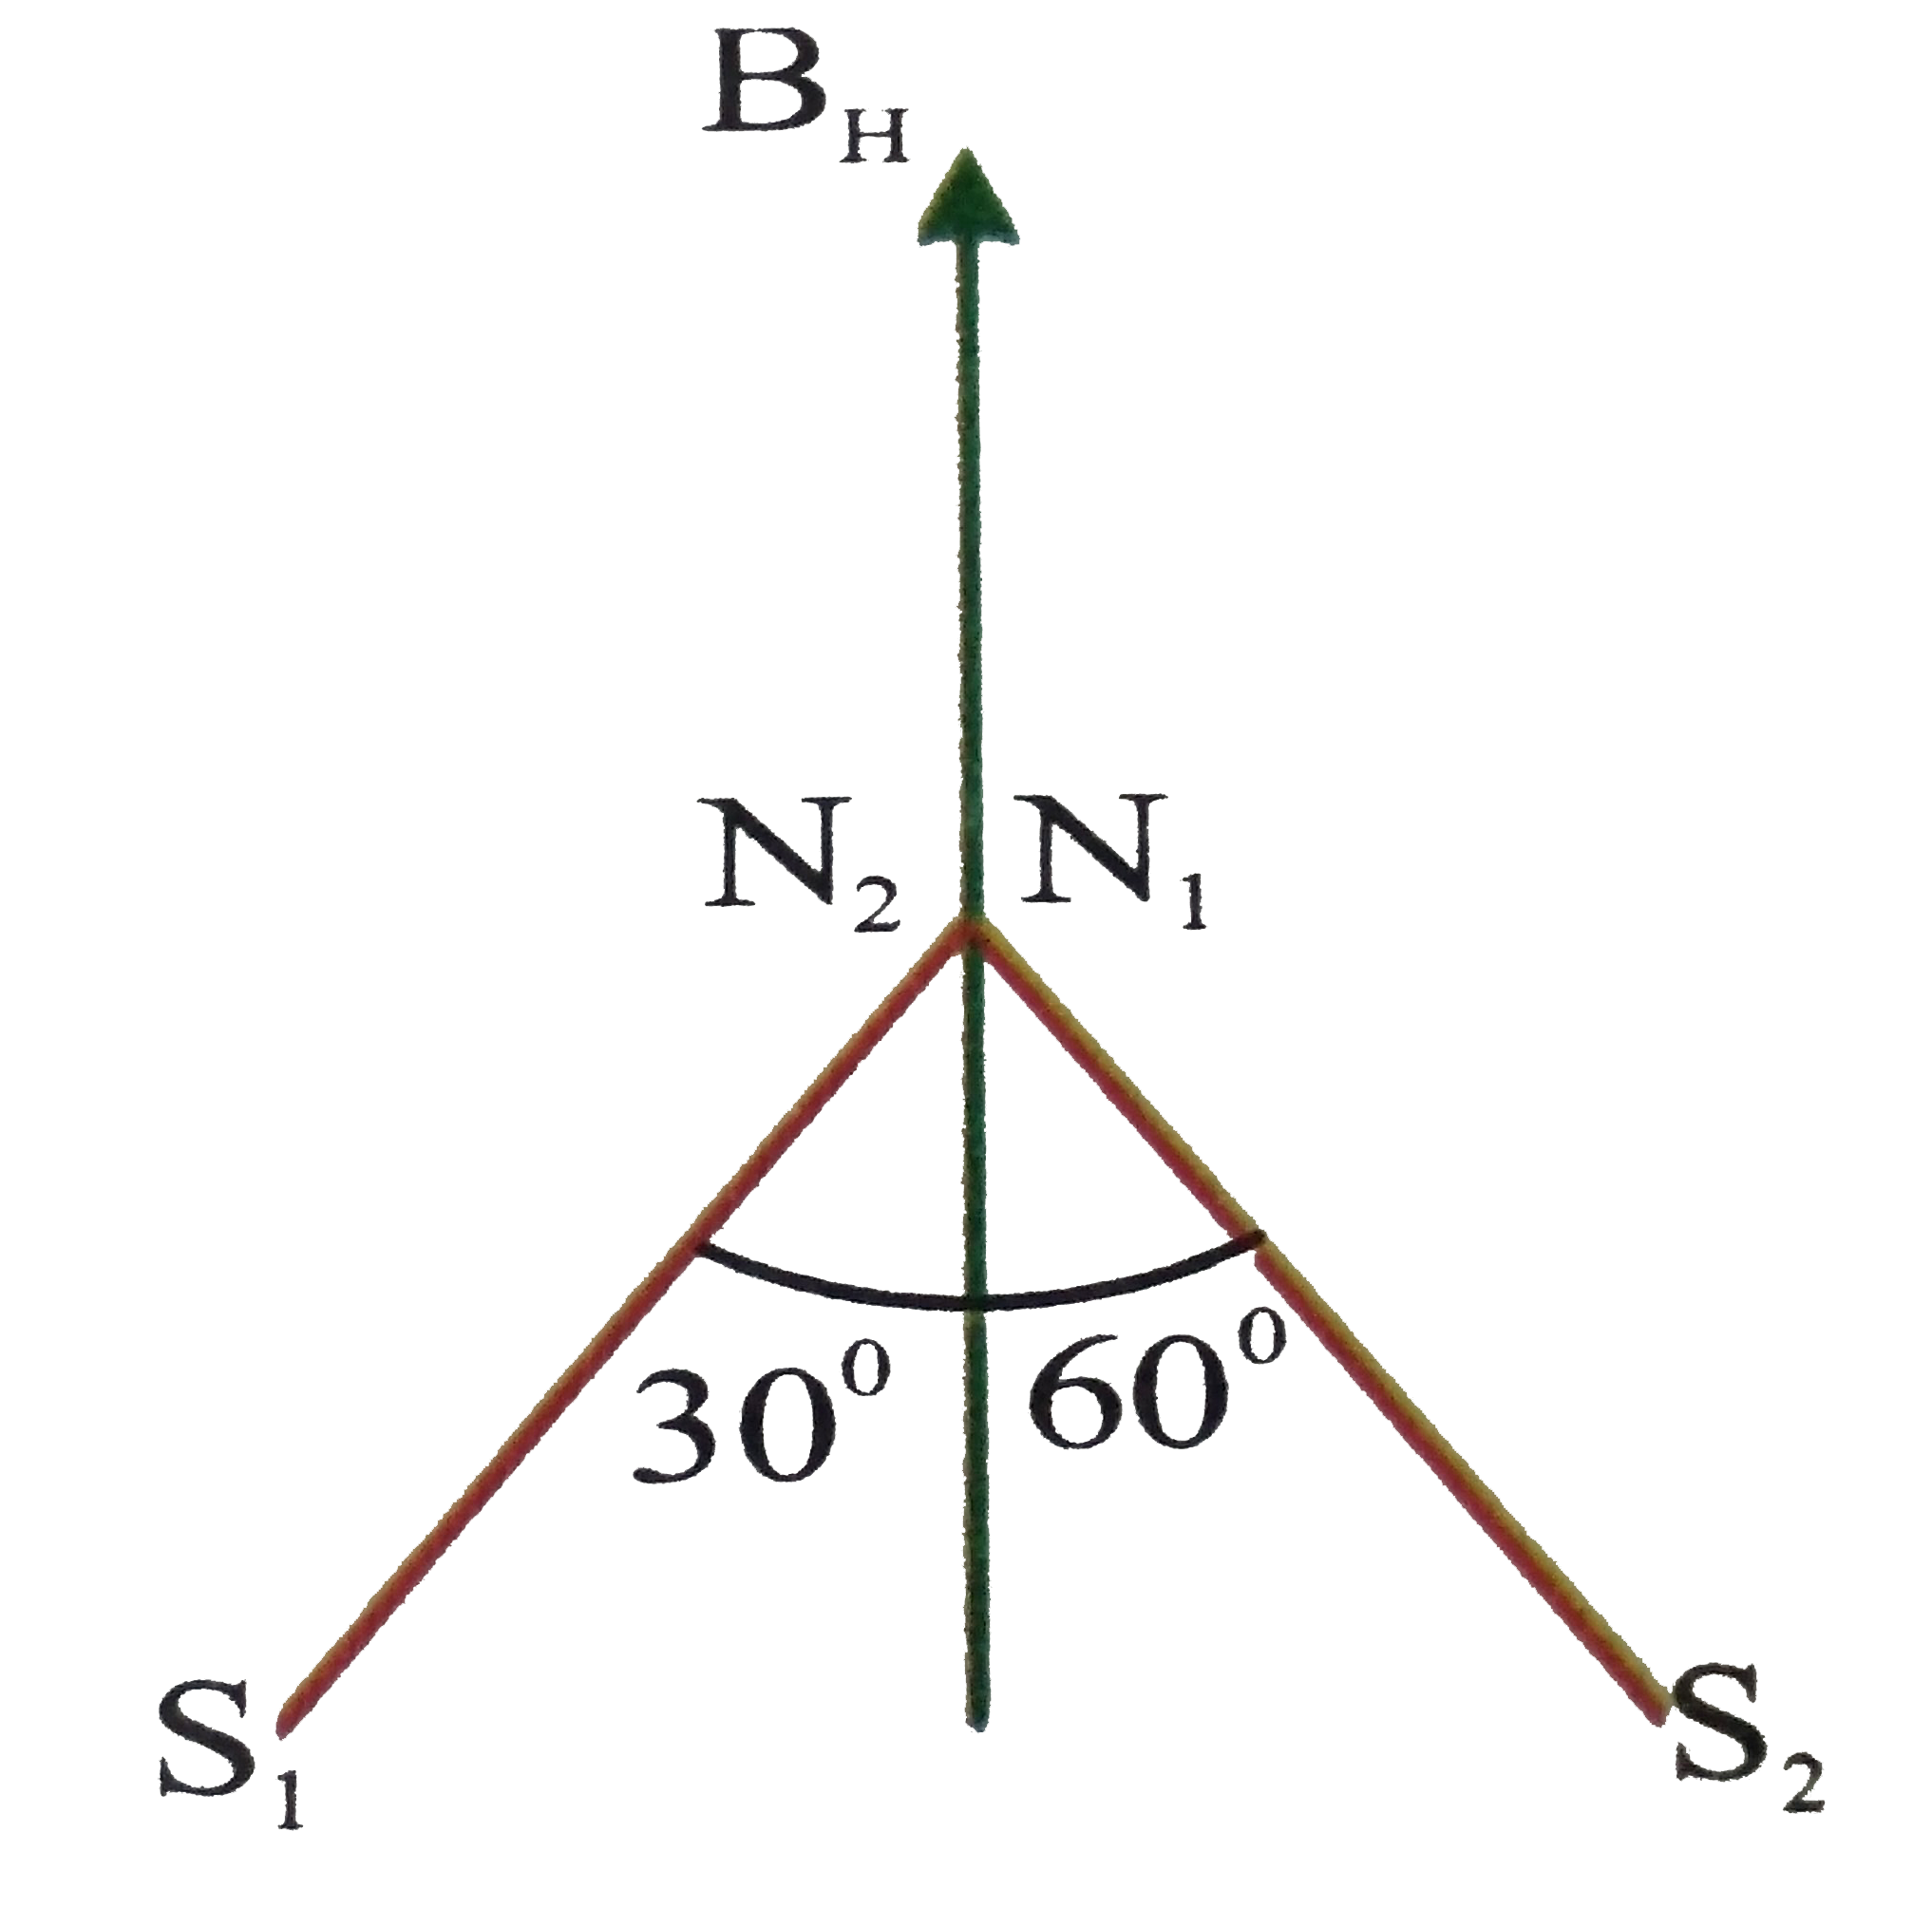 Two small magnets X and Y of dipole moments M(1) and M(2) are fixed perpendicular to each other with their north poles in contact. This arrangement is placed on a floating body so as to move freely in earth's magnetic field as shown in figure then the ratio of magnetic moment is